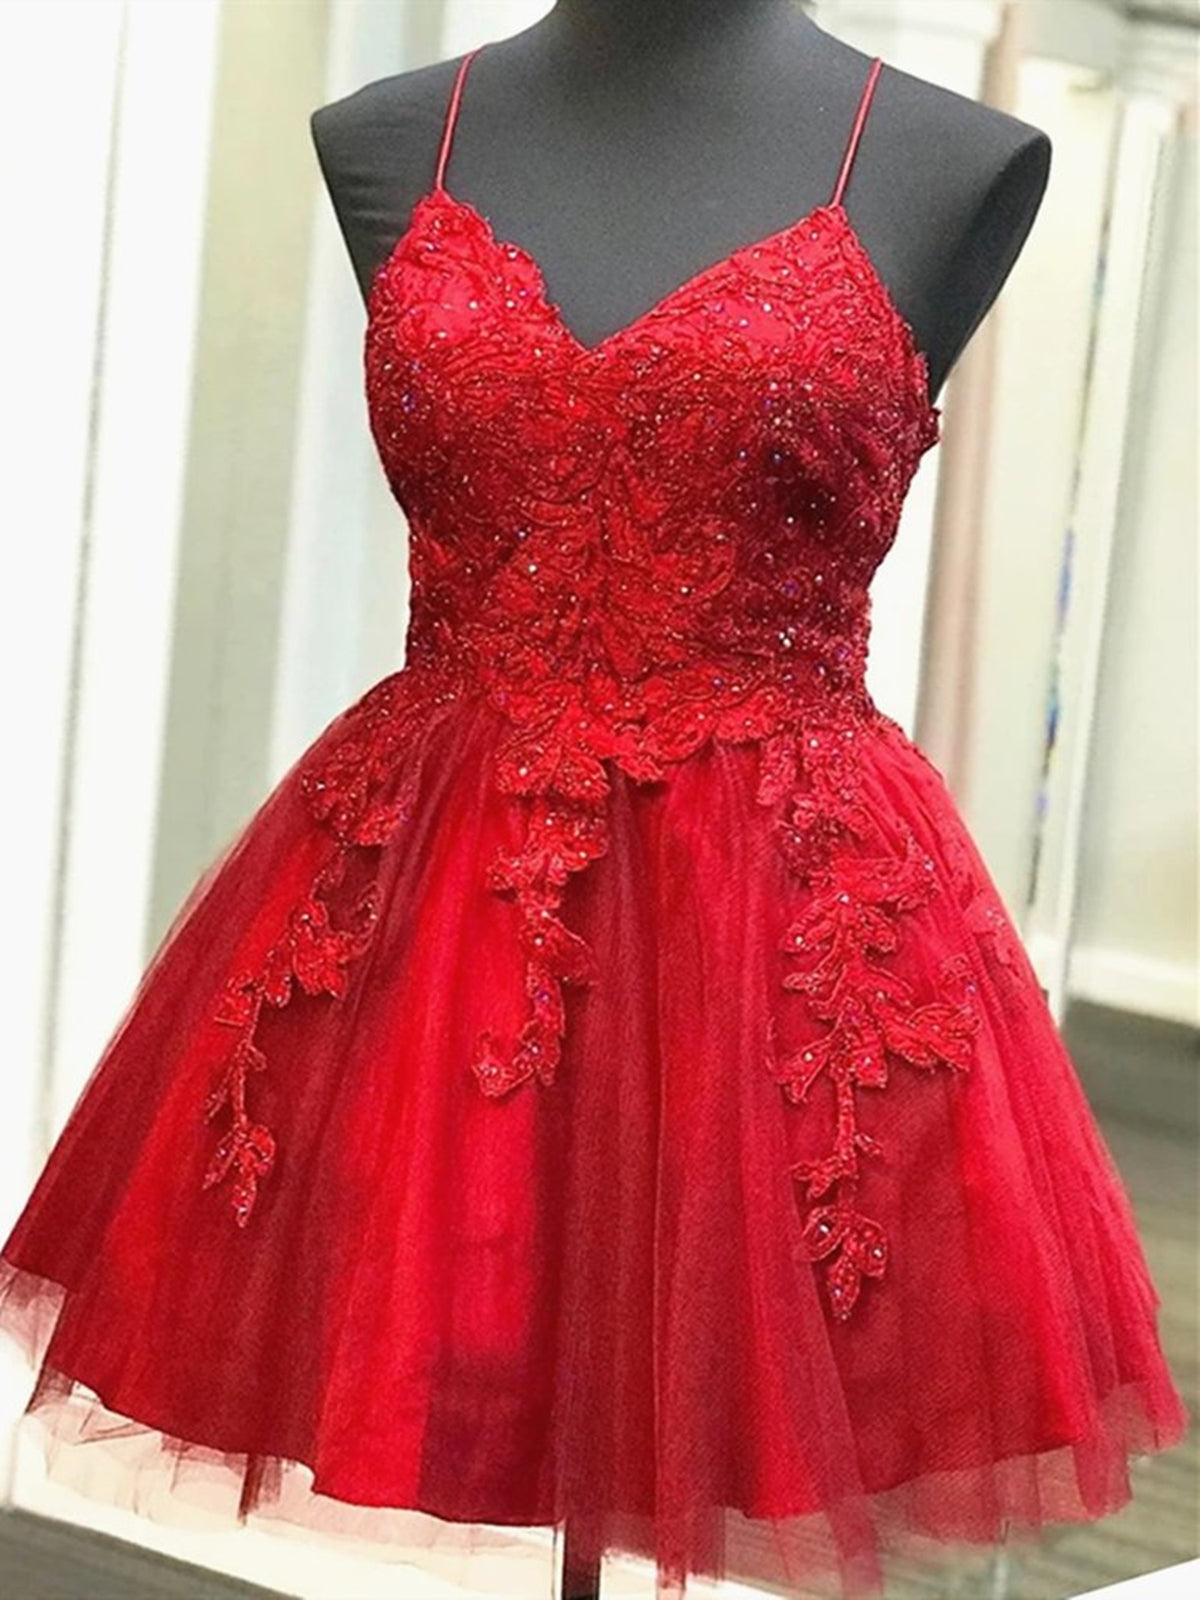 Formal Dress Outfit, Short V Neck Red Lace Prom Dresses, V Neck Short Red Lace Graduation Homecoming Dresses